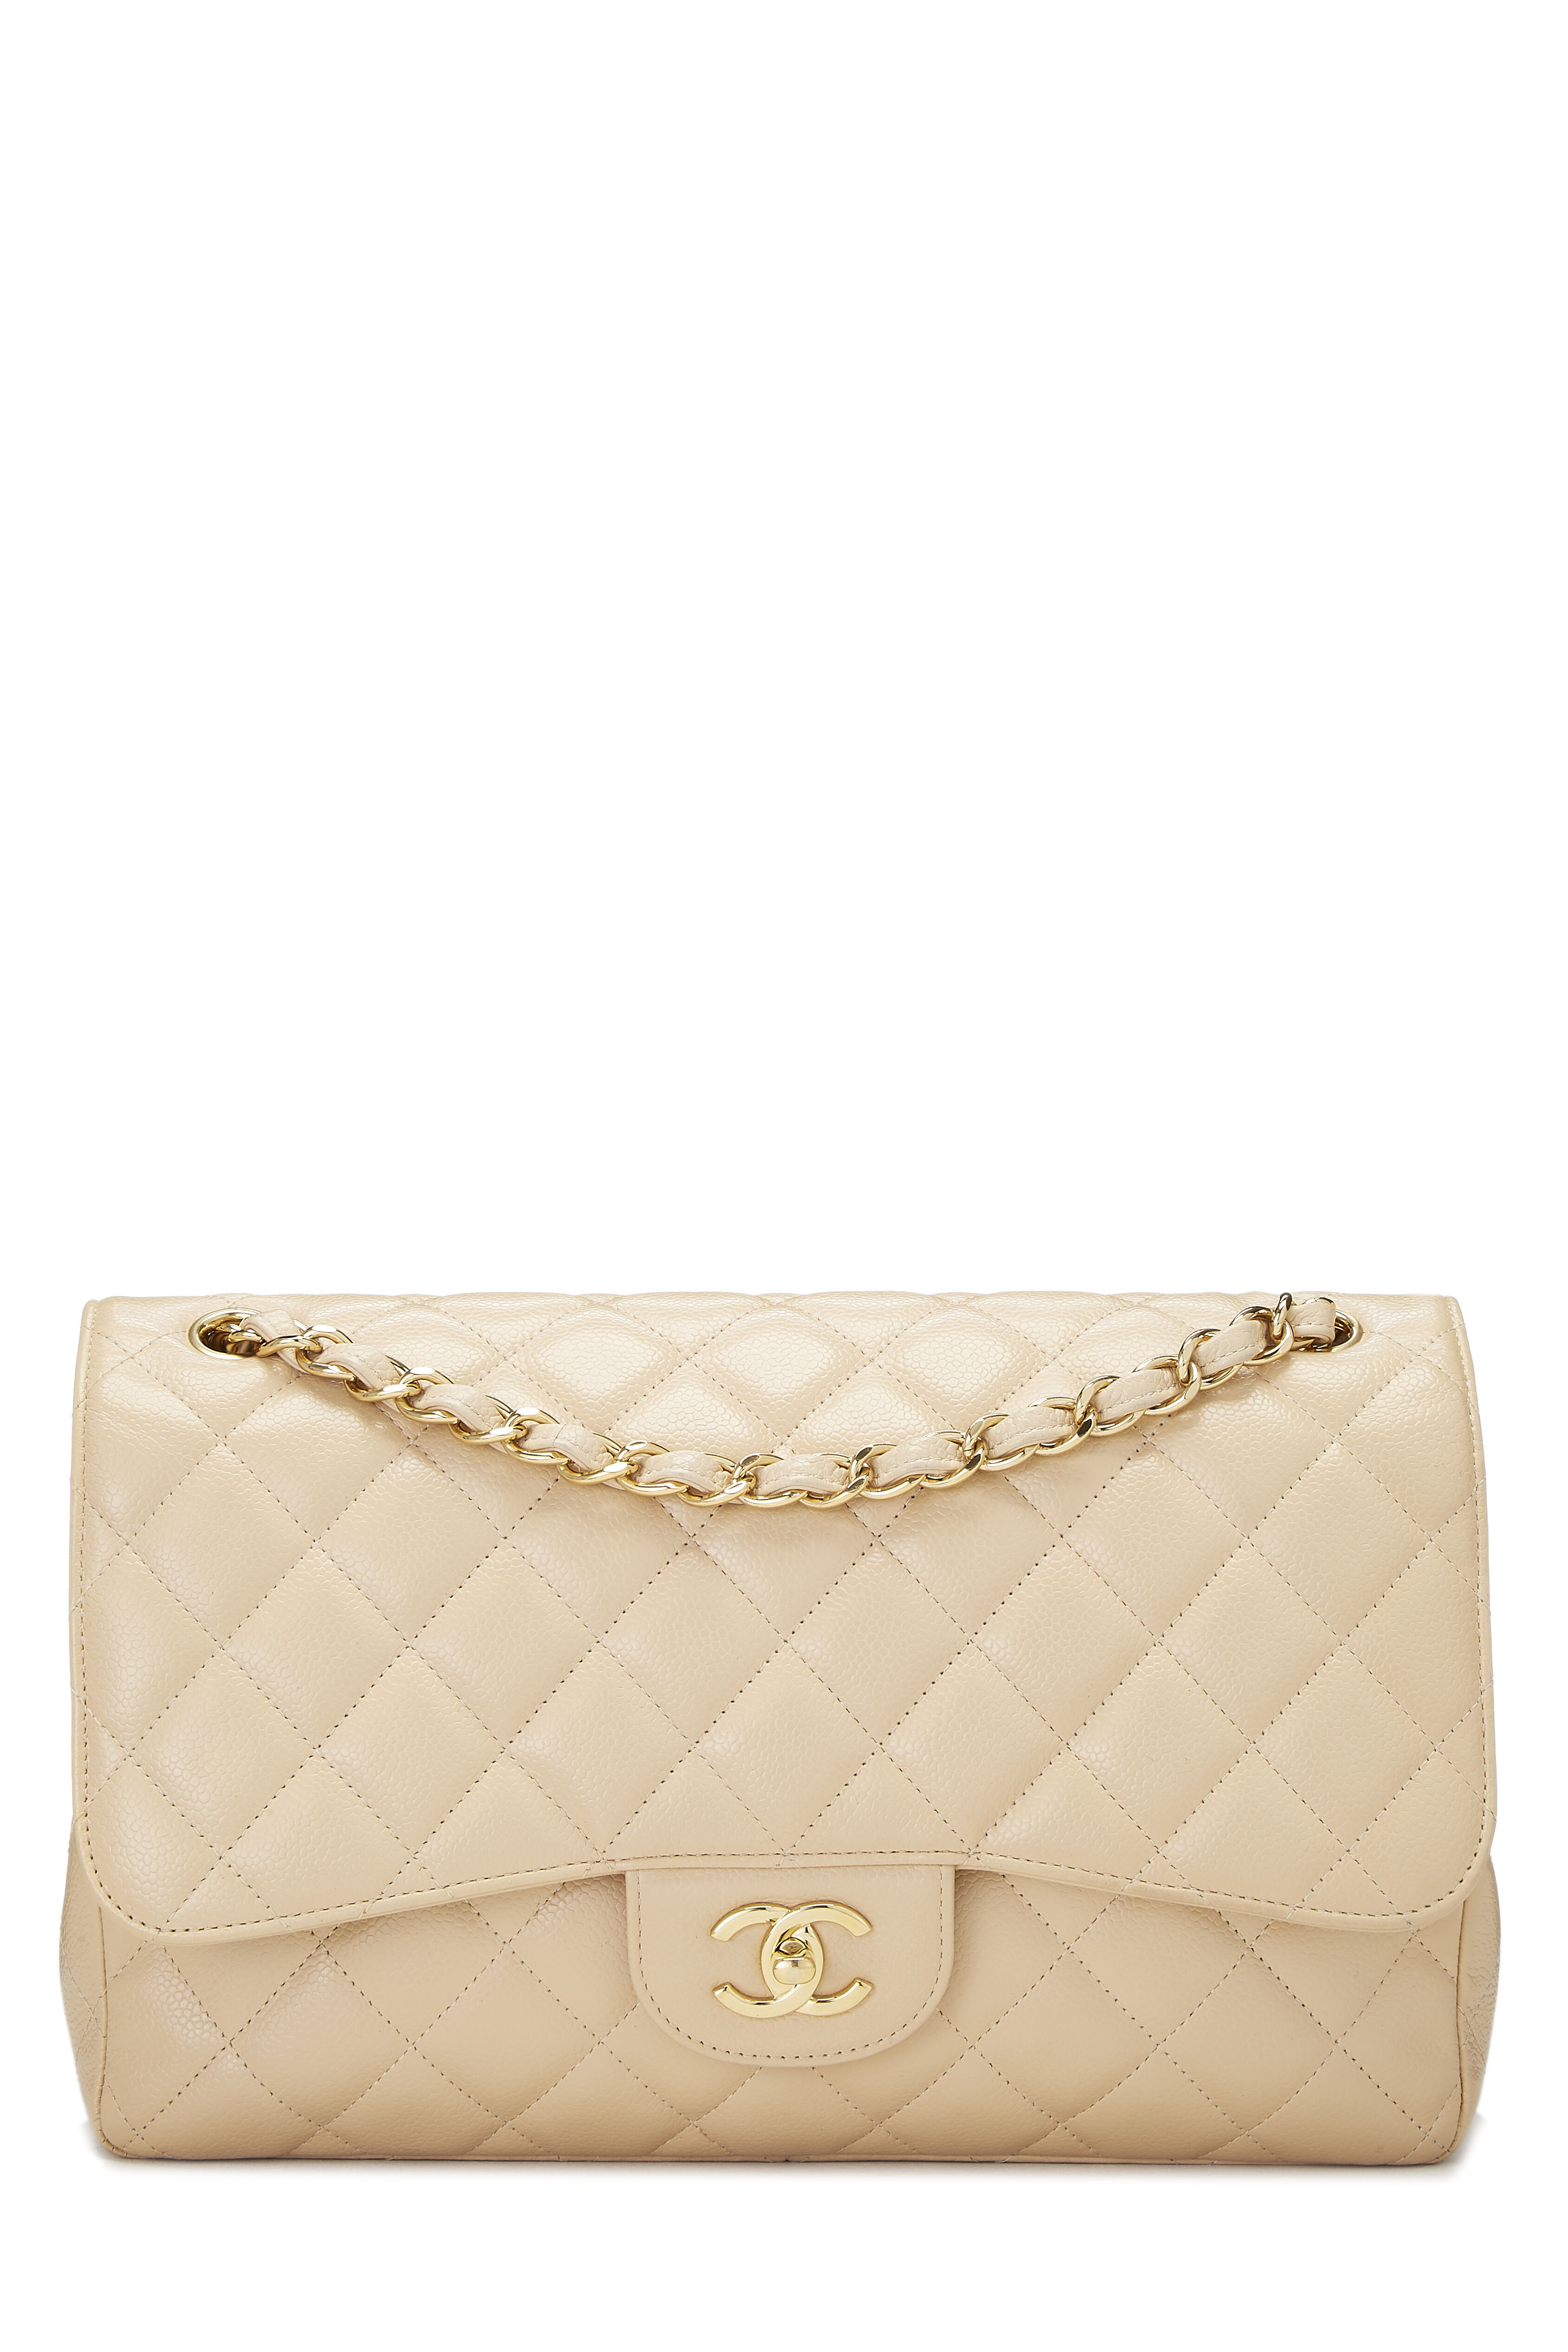 Chanel - Beige Quilted Caviar New Classic Double Flap Jumbo